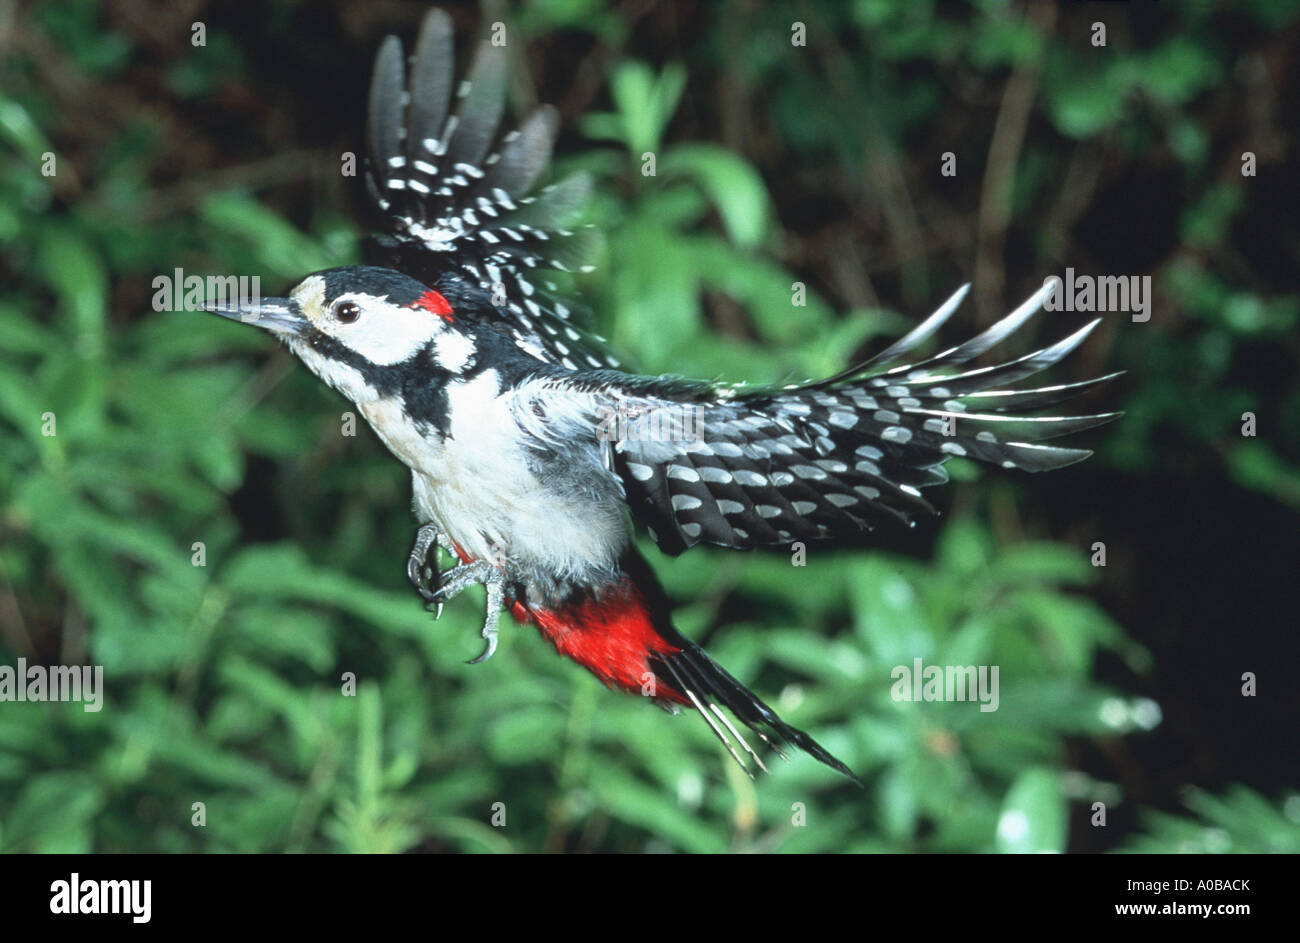 great spotted woodpecker (Picoides major, Dendrocopos major), flying Stock Photo